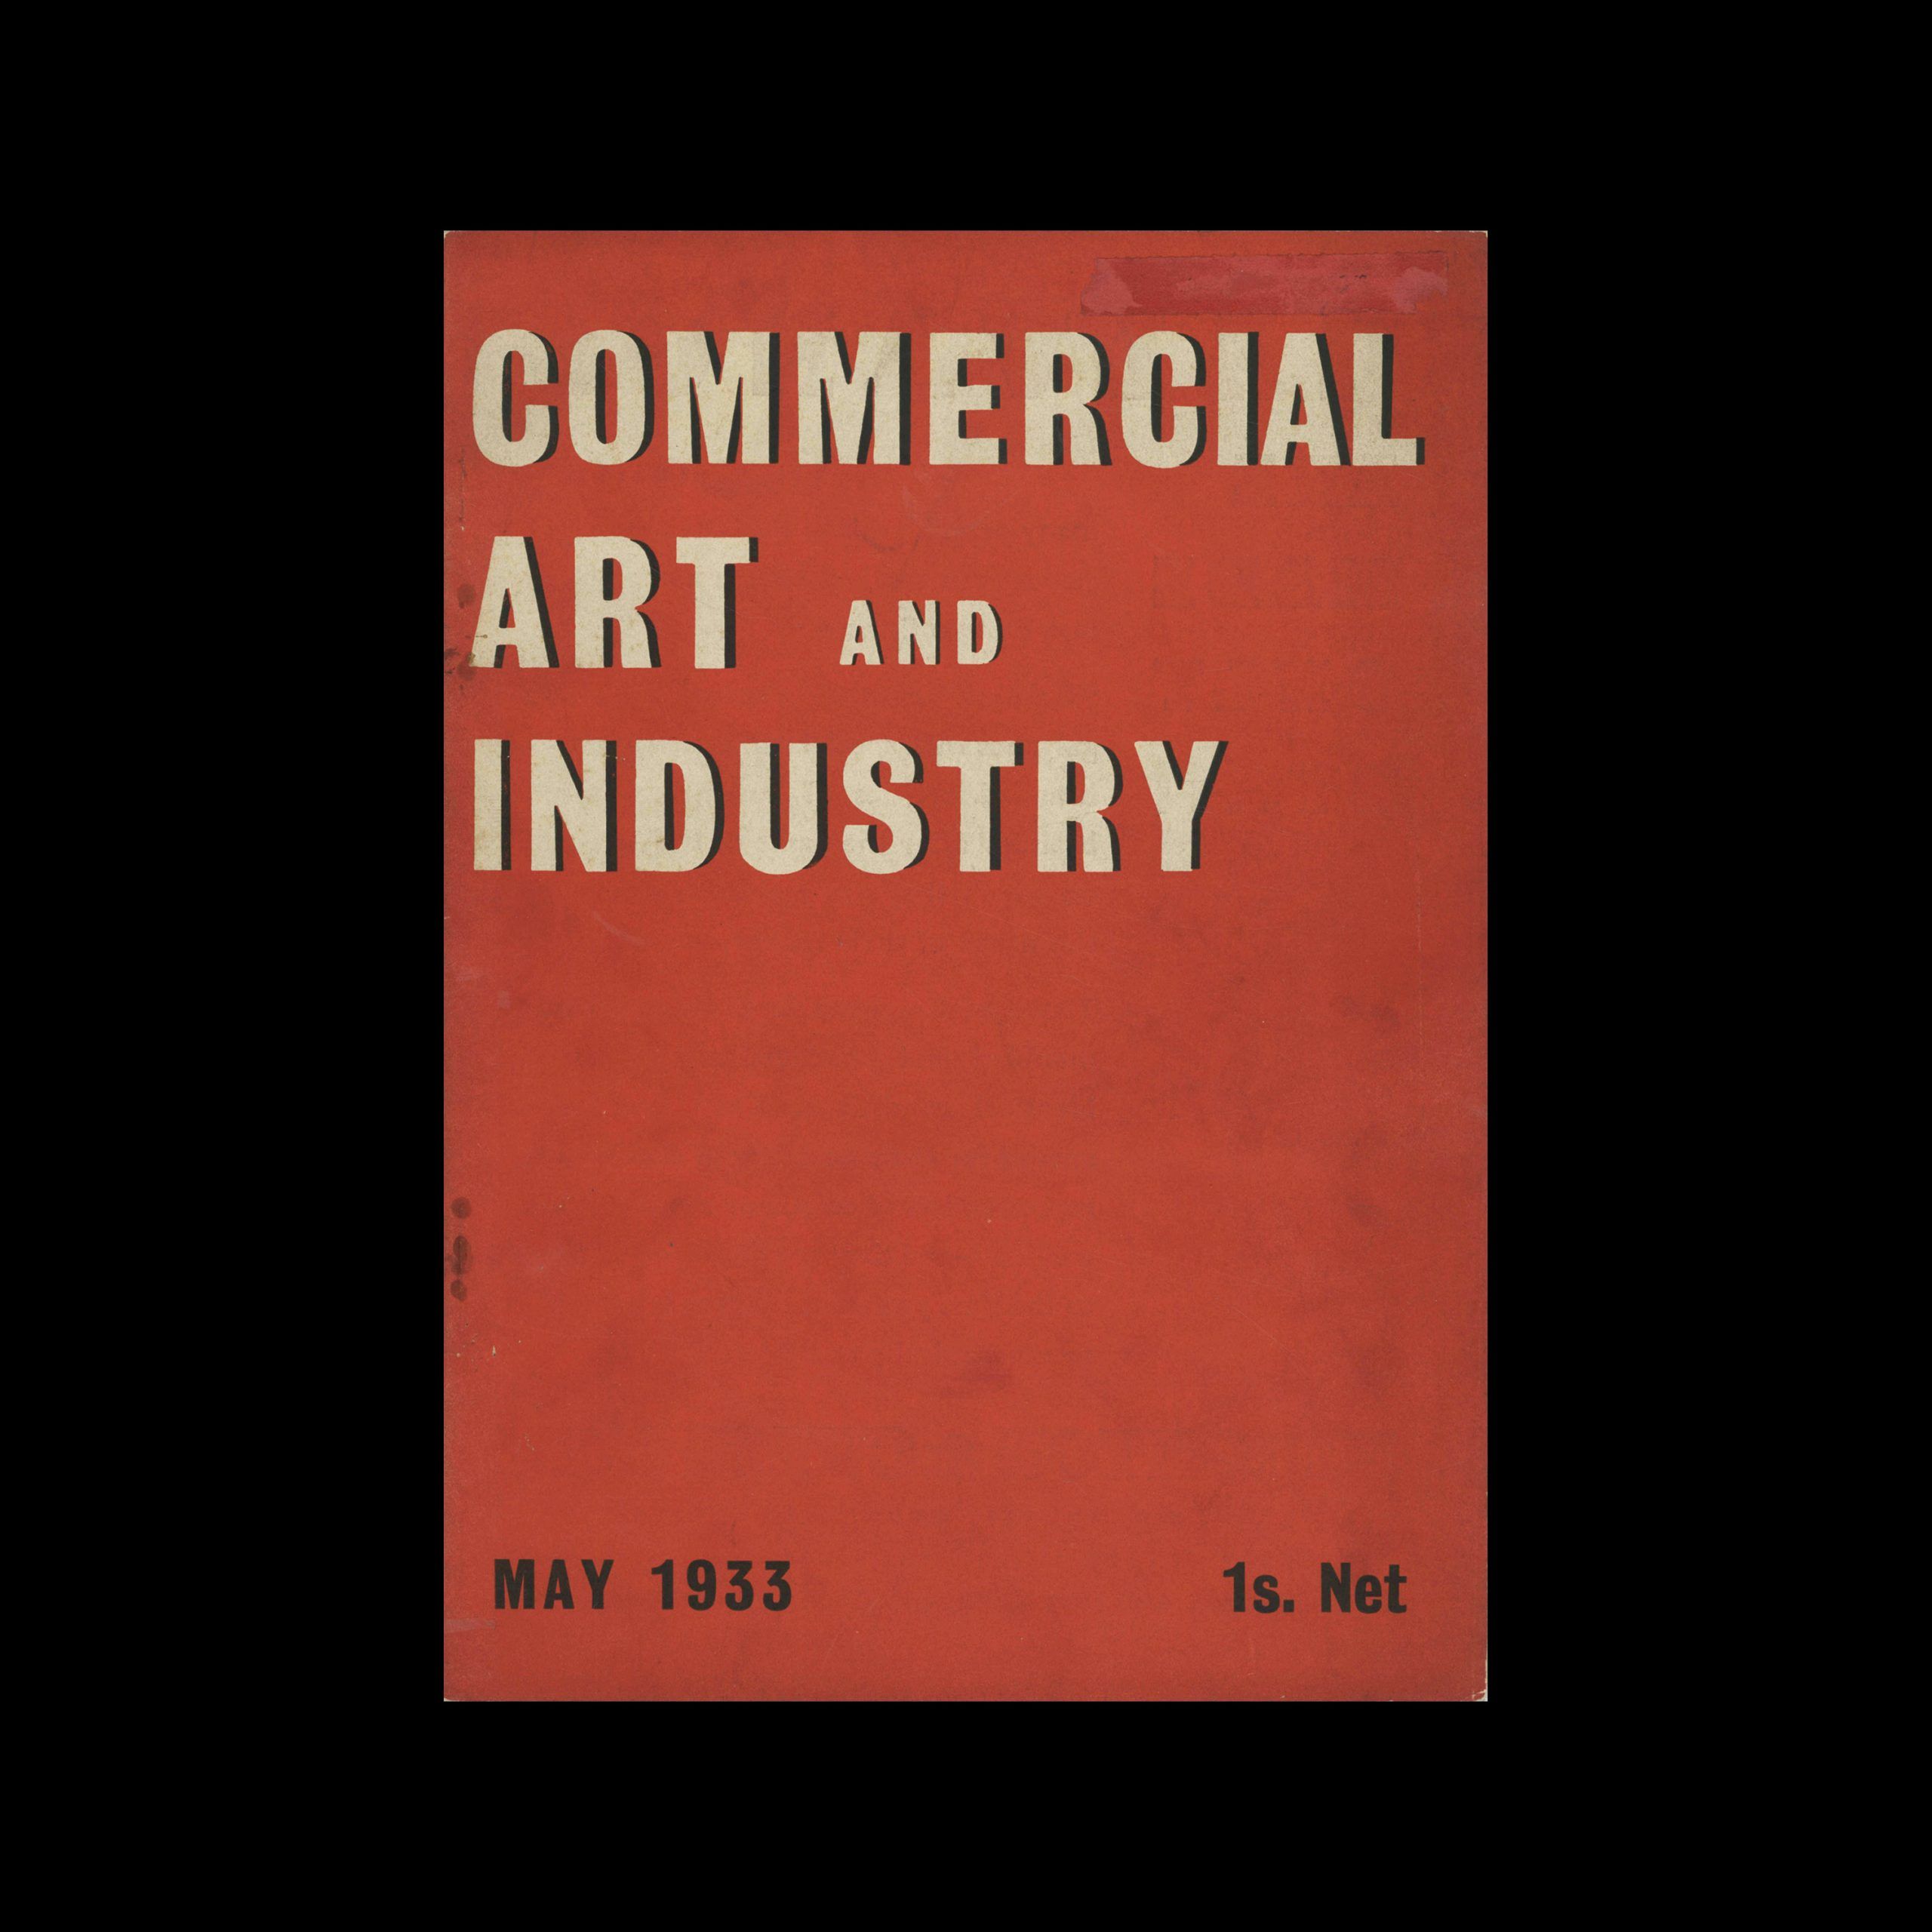 Commercial Art and Industry 83, May 1933